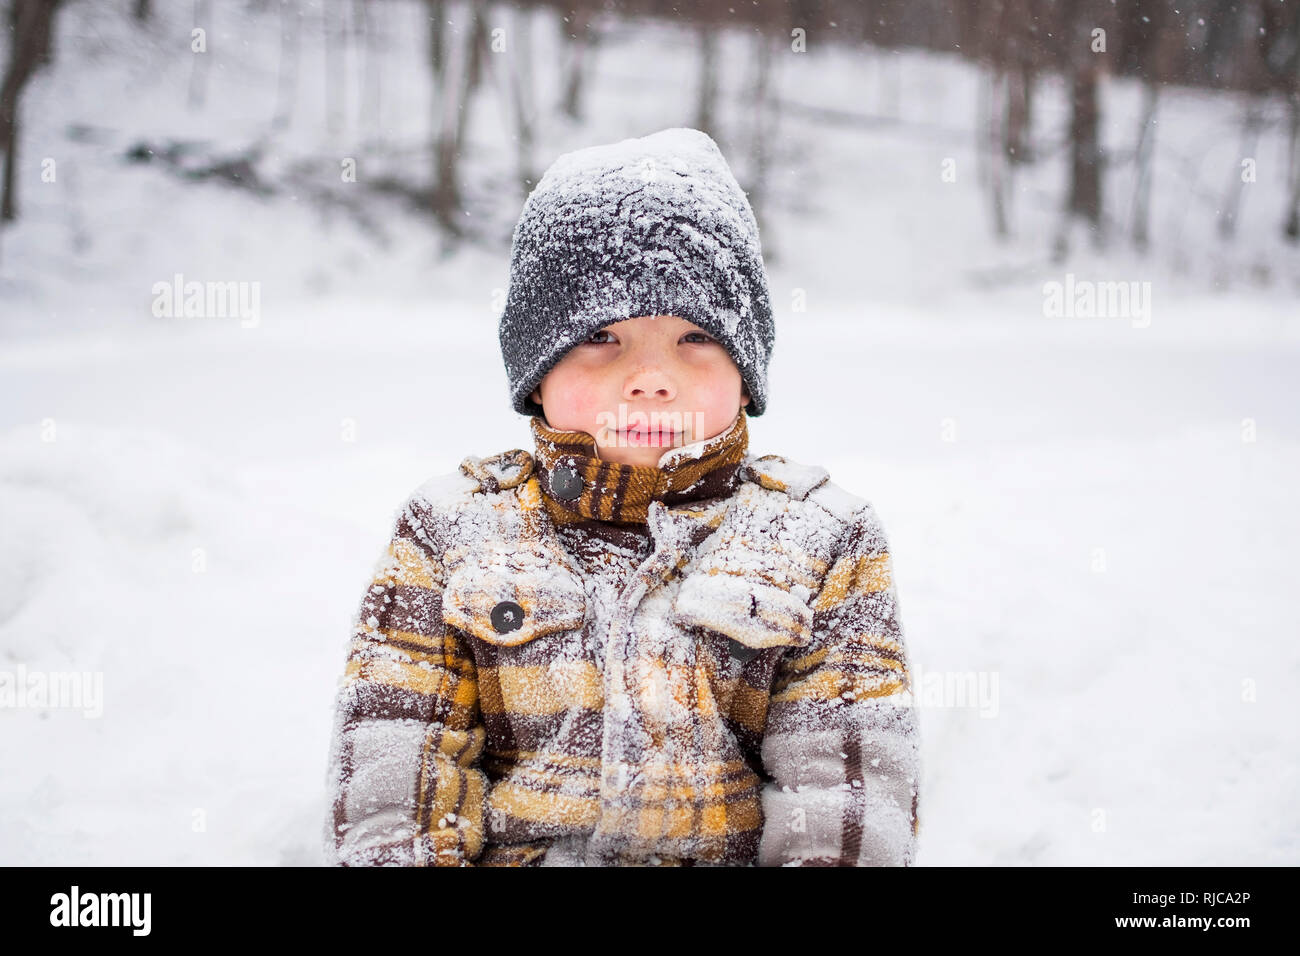 Portrait of a boy in the snow, Wisconsin, United States Stock Photo